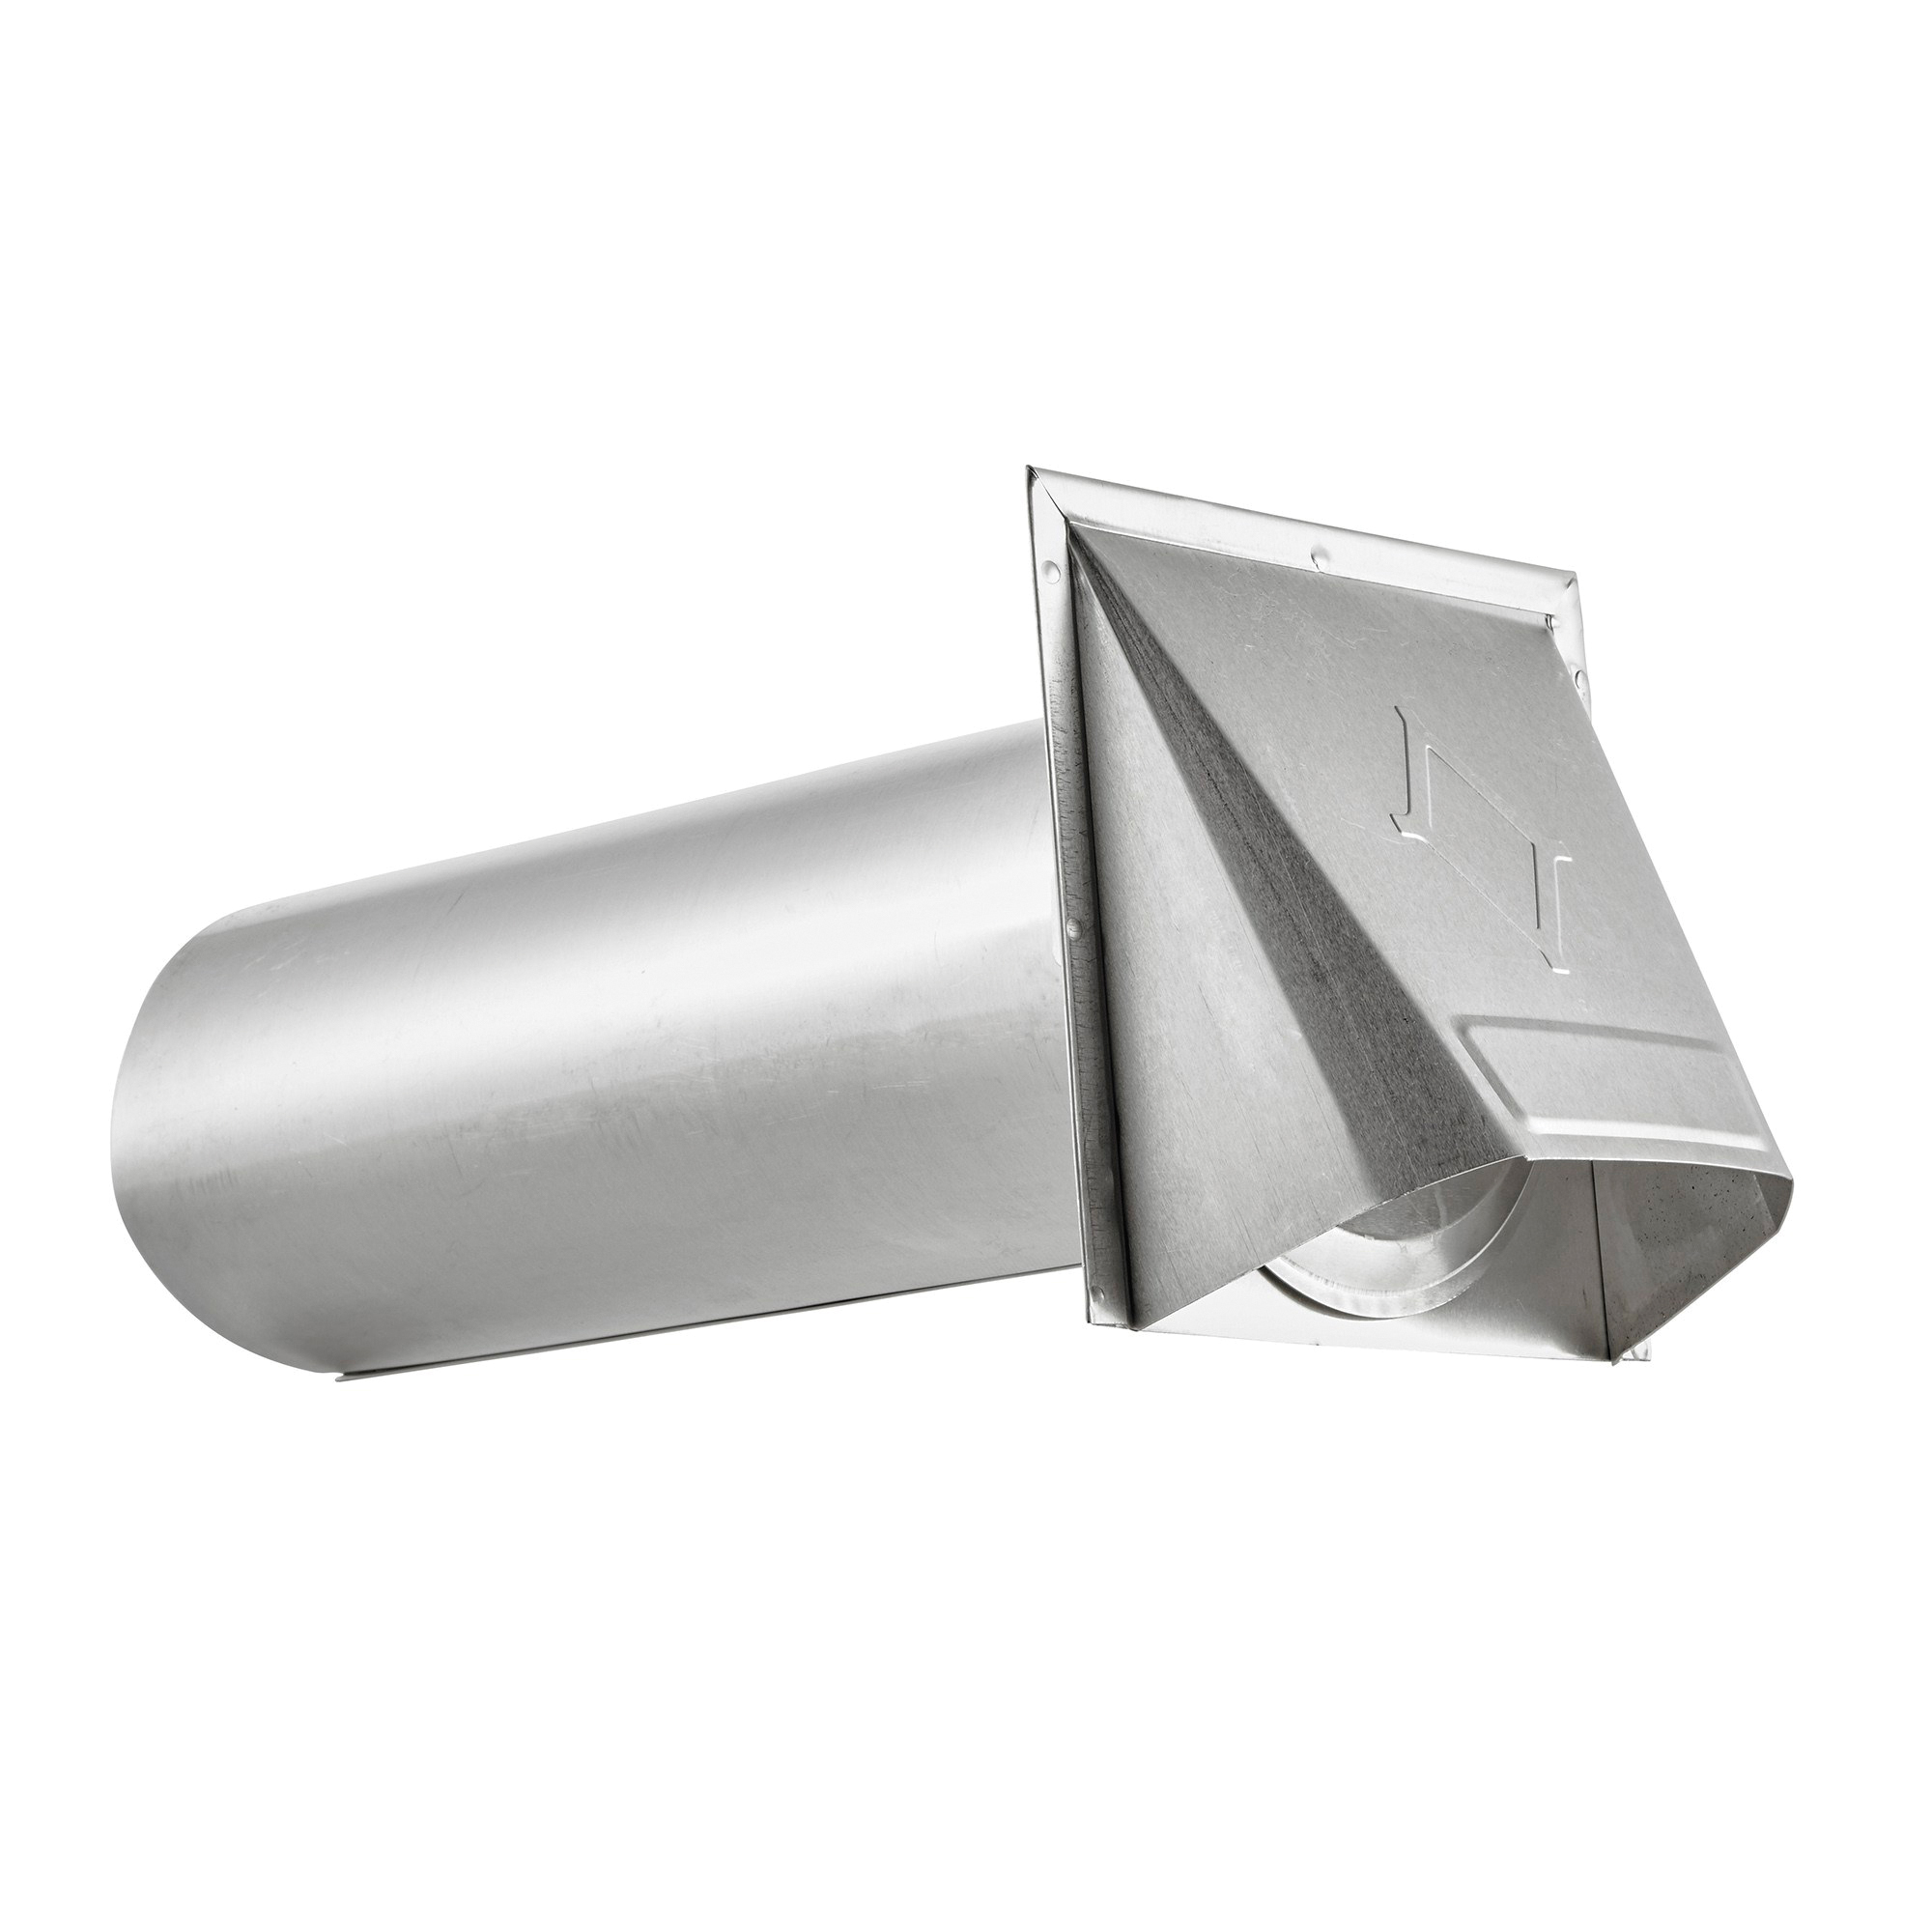 Lambro 544 Hood Vent With 11 in Tail Pipe, 4 in Dia, 2-1/2 in Hood Opening, 11 in Tube, Domestic